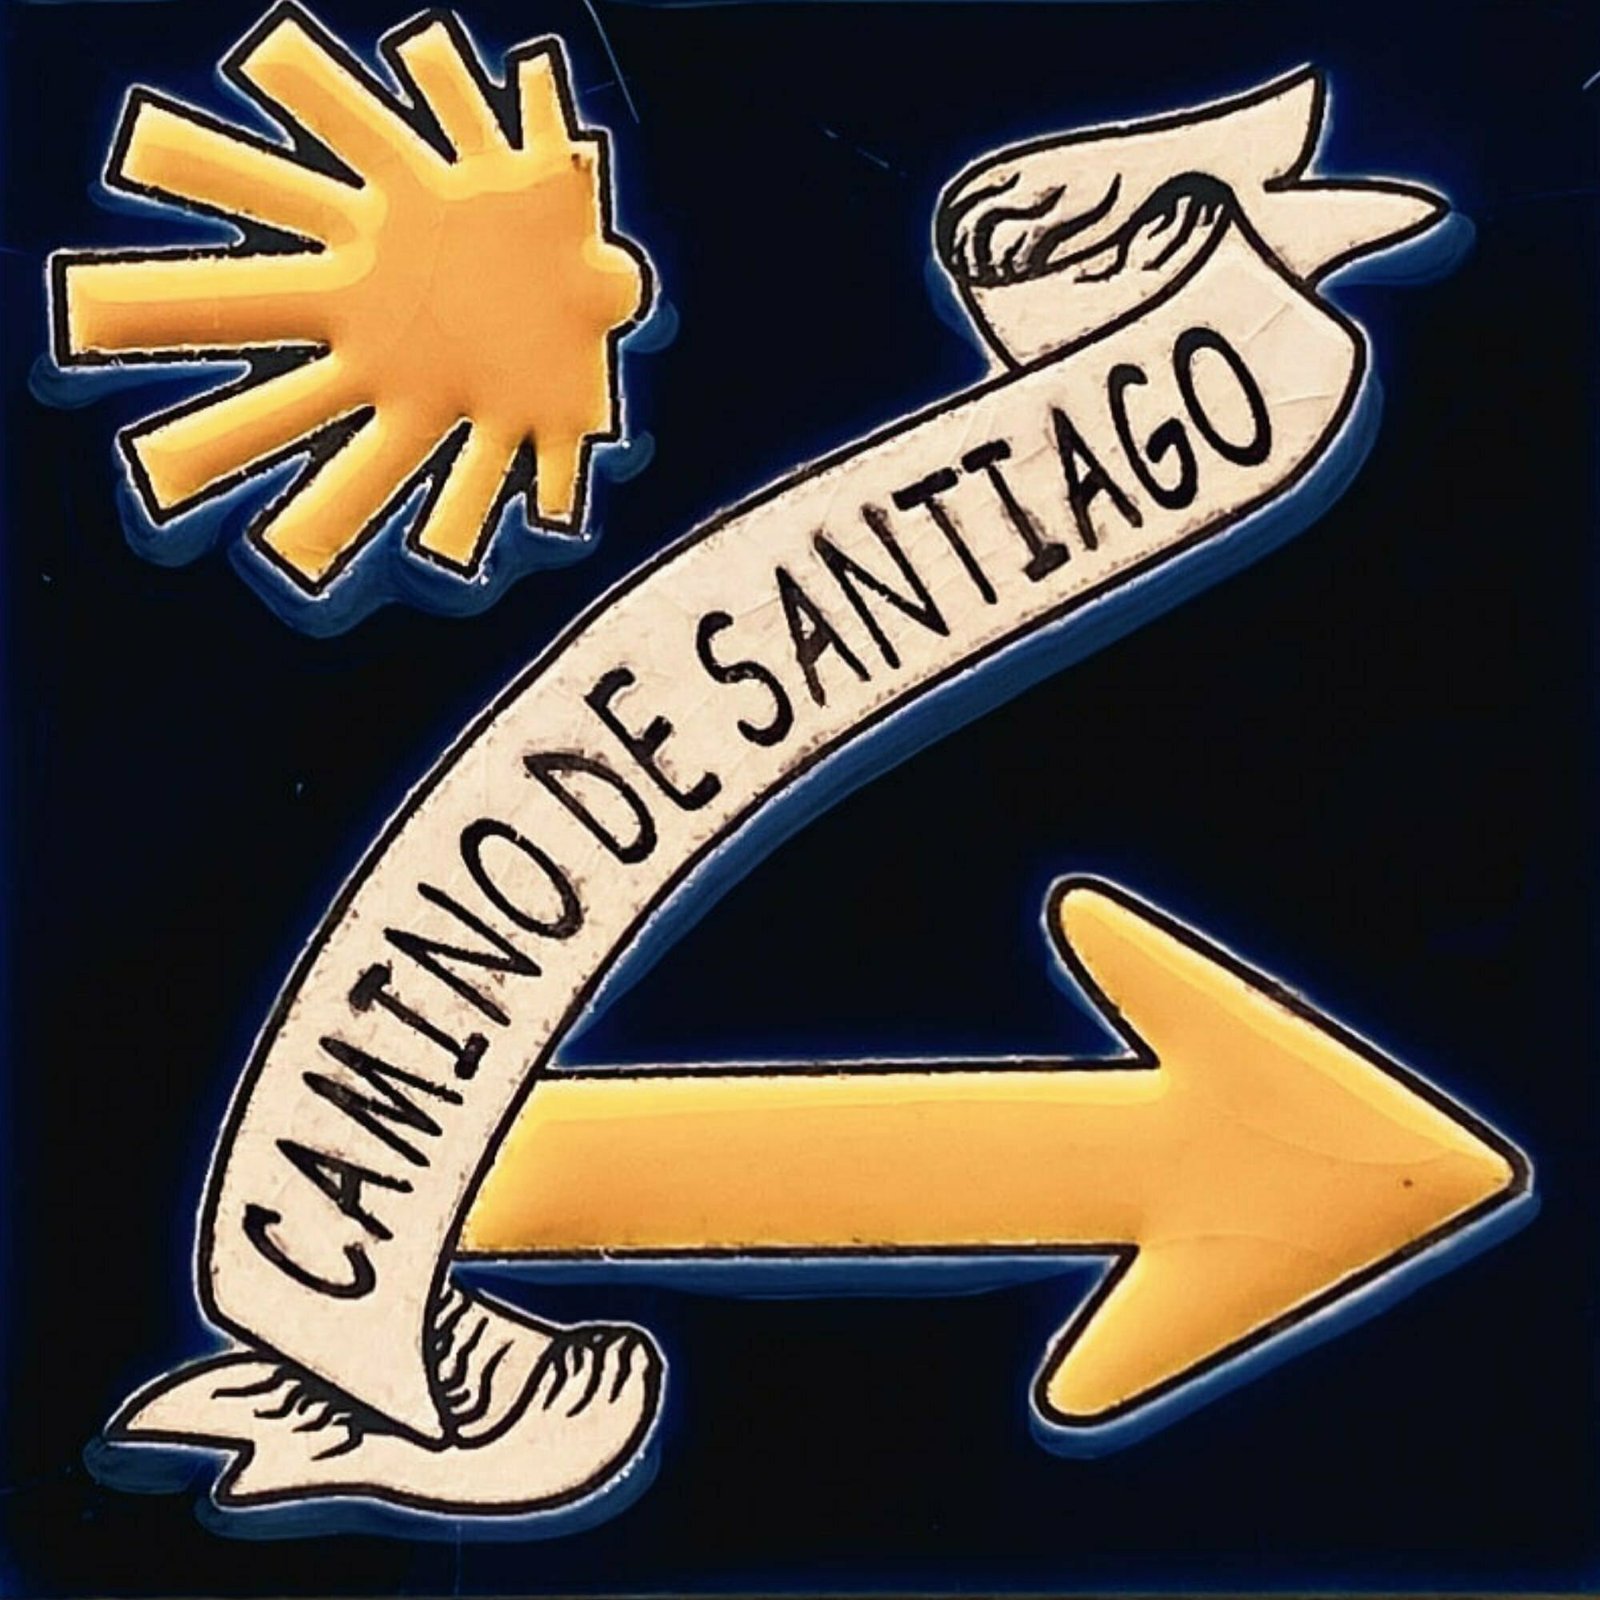 a sign for the camino de Santiago is embossed on a dark blue tile with a pastel orange shell logo and directional arrow pointing to the right